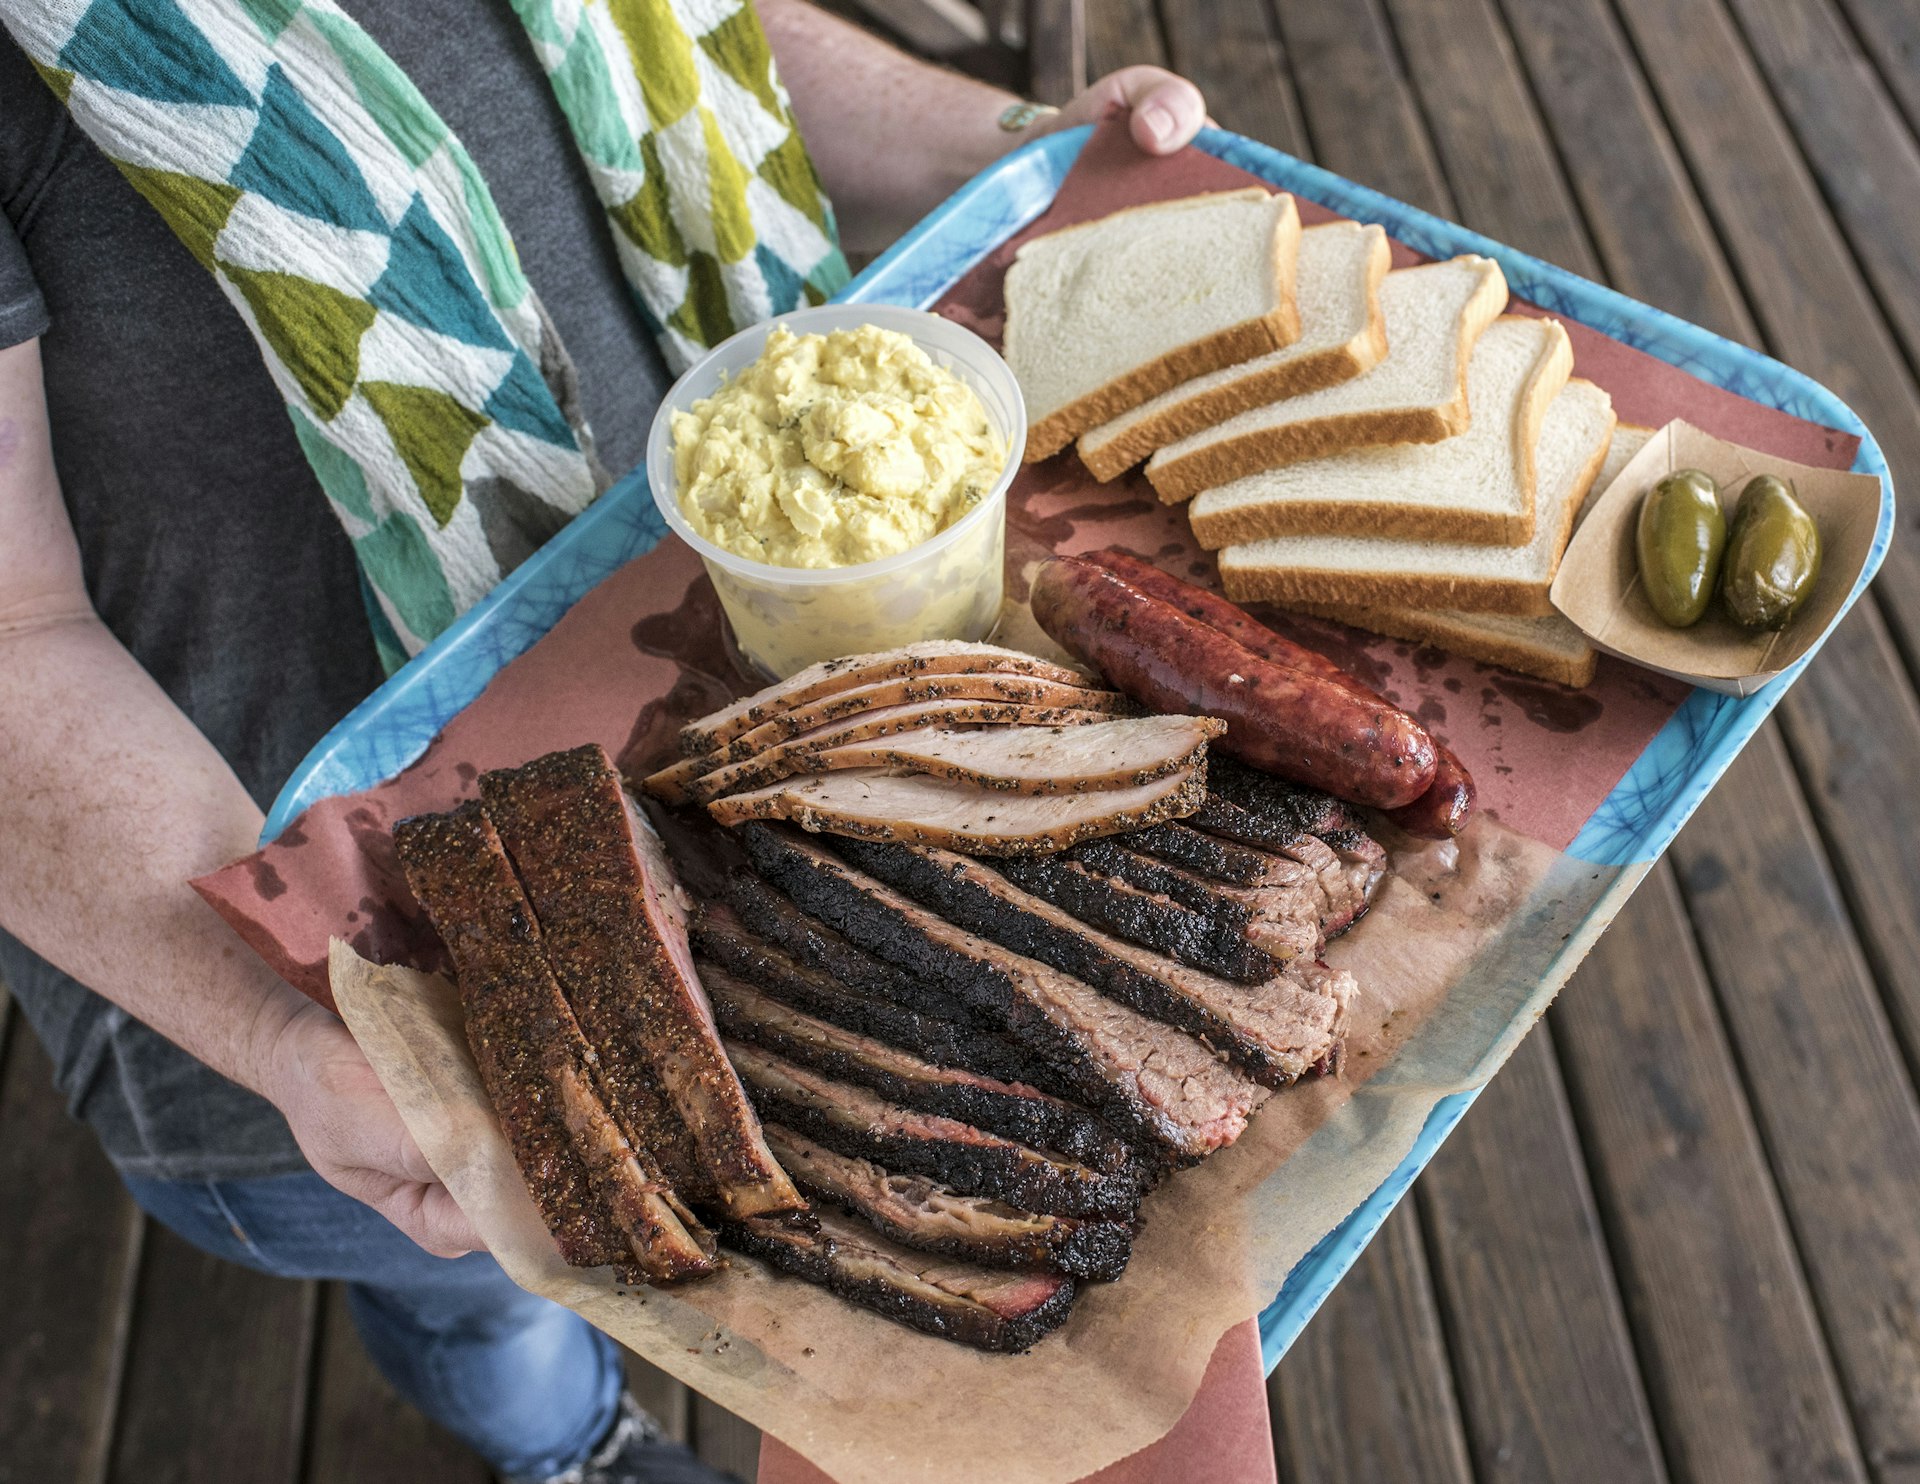 A tray of pork ribs, smoked turkey, sausage, and brisket from Franklin BBQ in Austin